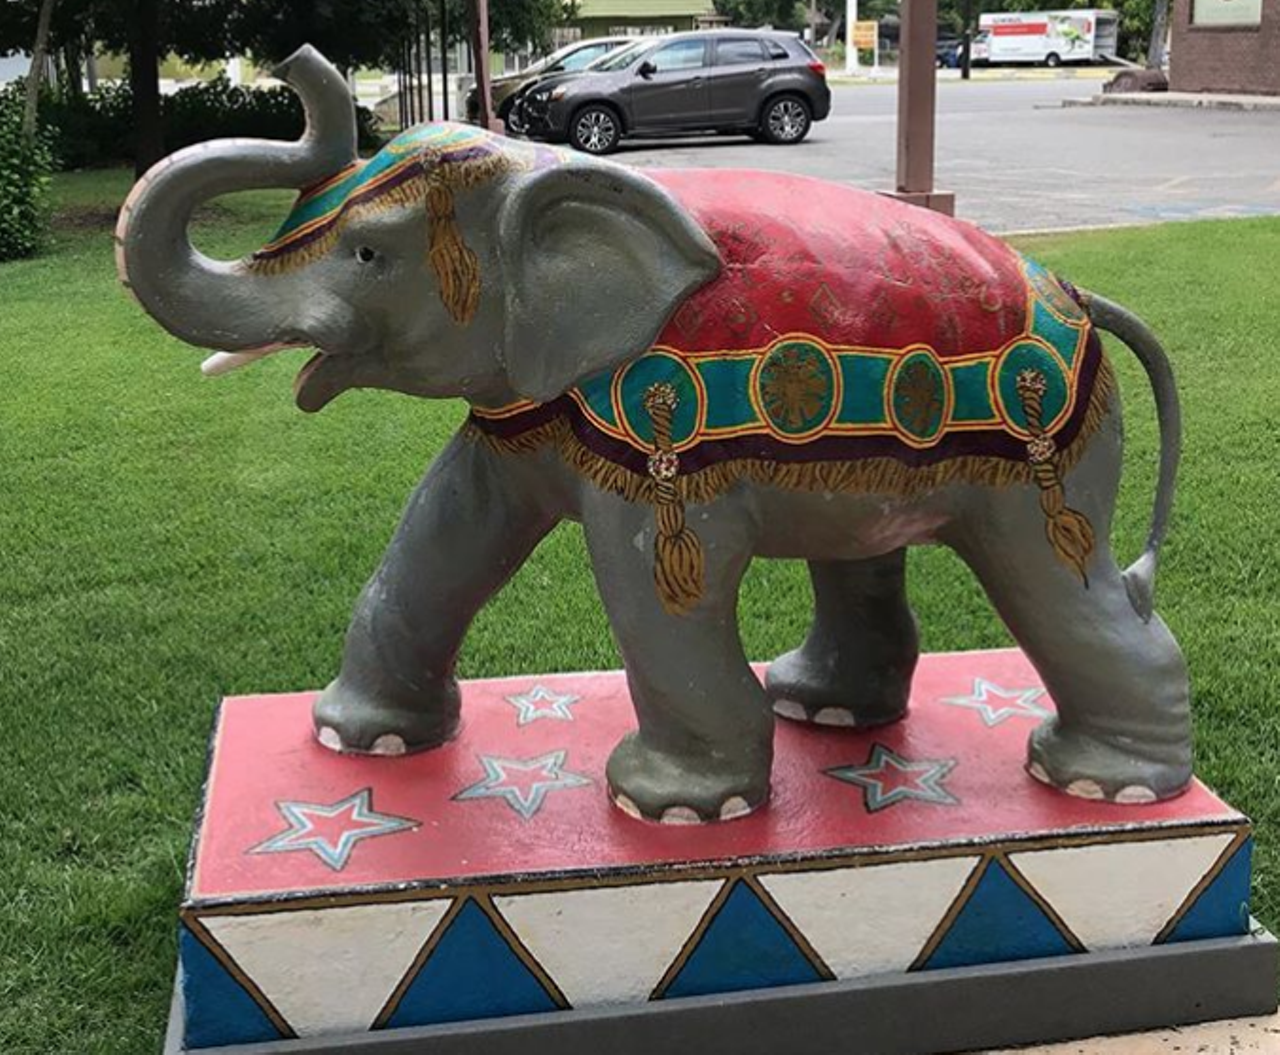 Cinnamon Kandy, the circus elephant
3801 Broadway St, (210) 357-1900, wittemuseum.org
While there’s much to explore at the Witte Museum, your next visit should definitely include checking out this adorable circus elephant statue. Cinnamon Kandy has called the Witte home for more than 75 years and has been subject to a bunch of necios climbing on top for pictures. While Cinnamon Kandy is now in front of the Morton Research and Collections Center nearby, she’s still worth a detour.
Photo via Instagram / colchas_y_mas